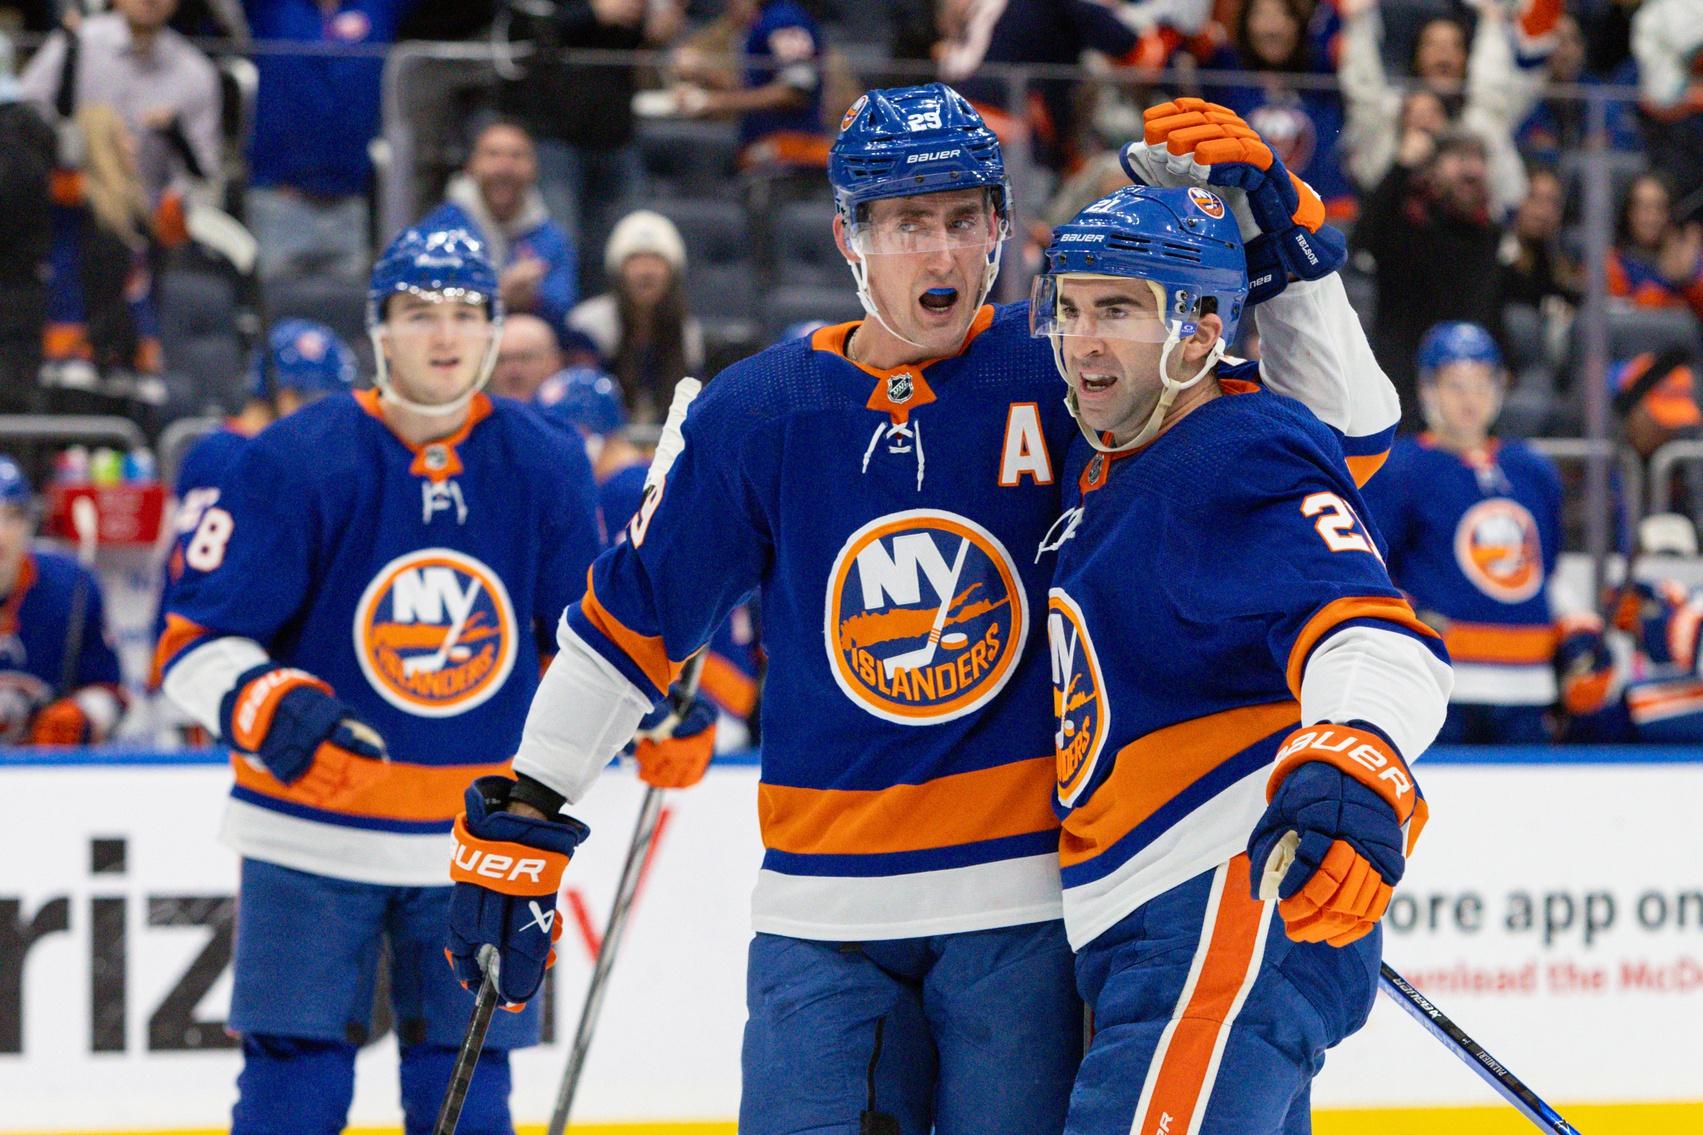 New York Islanders center Kyle Palmieri (21) celebrates his goal with New York Islanders center Brock Nelson (29) against the Toronto Maple Leafs during the second period at UBS Arena. / Thomas Salus-USA TODAY Sports